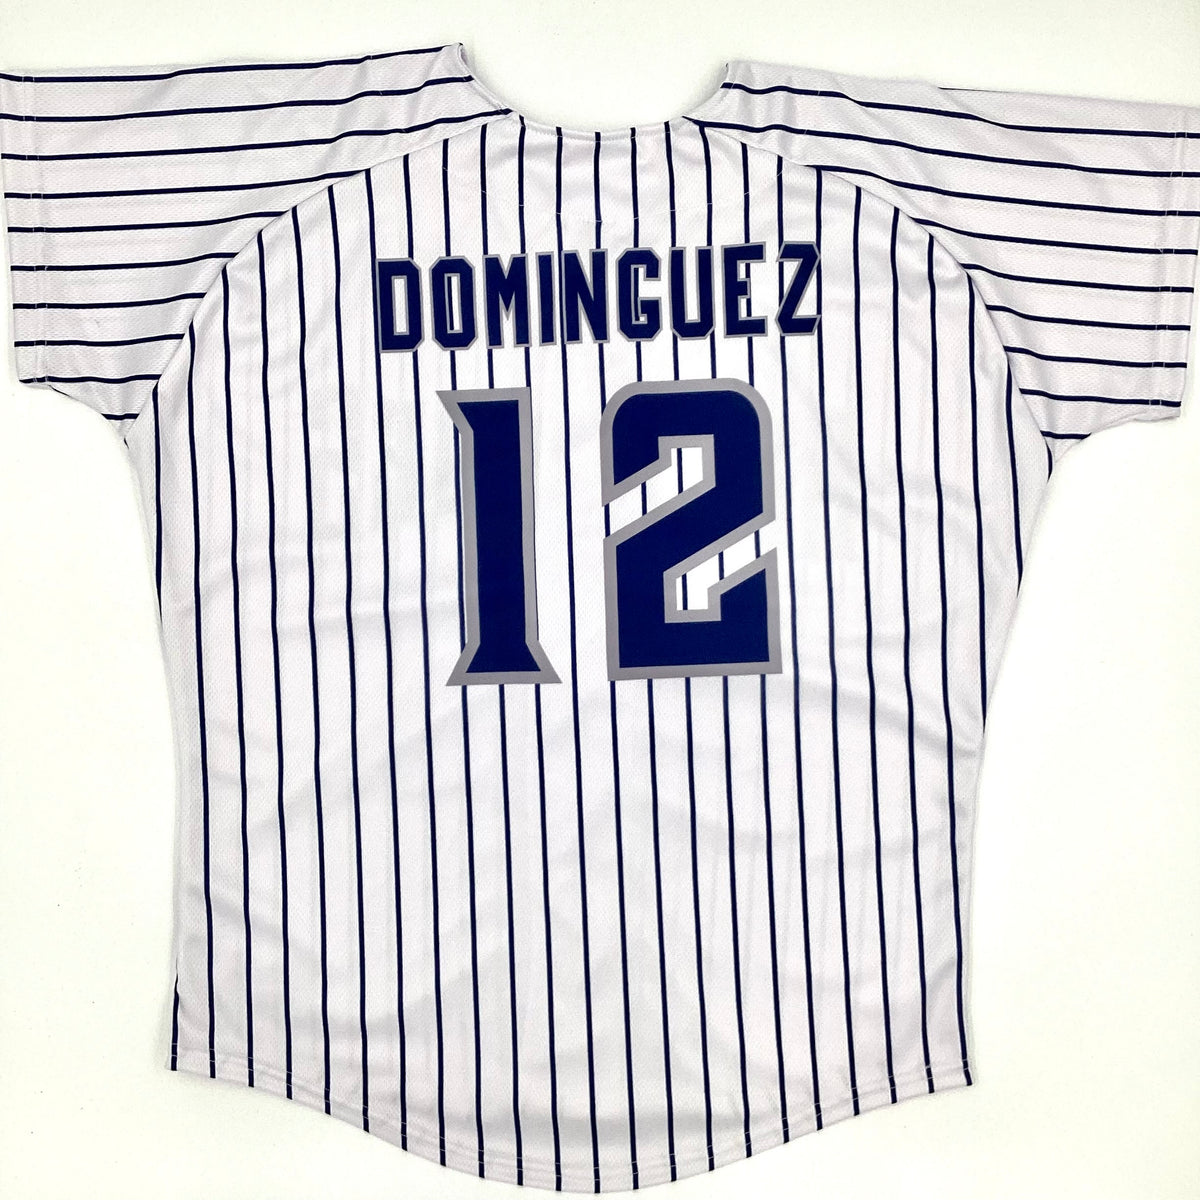 Jasson Dominguez Jersey - NY Yankees Replica Adult Road Jersey